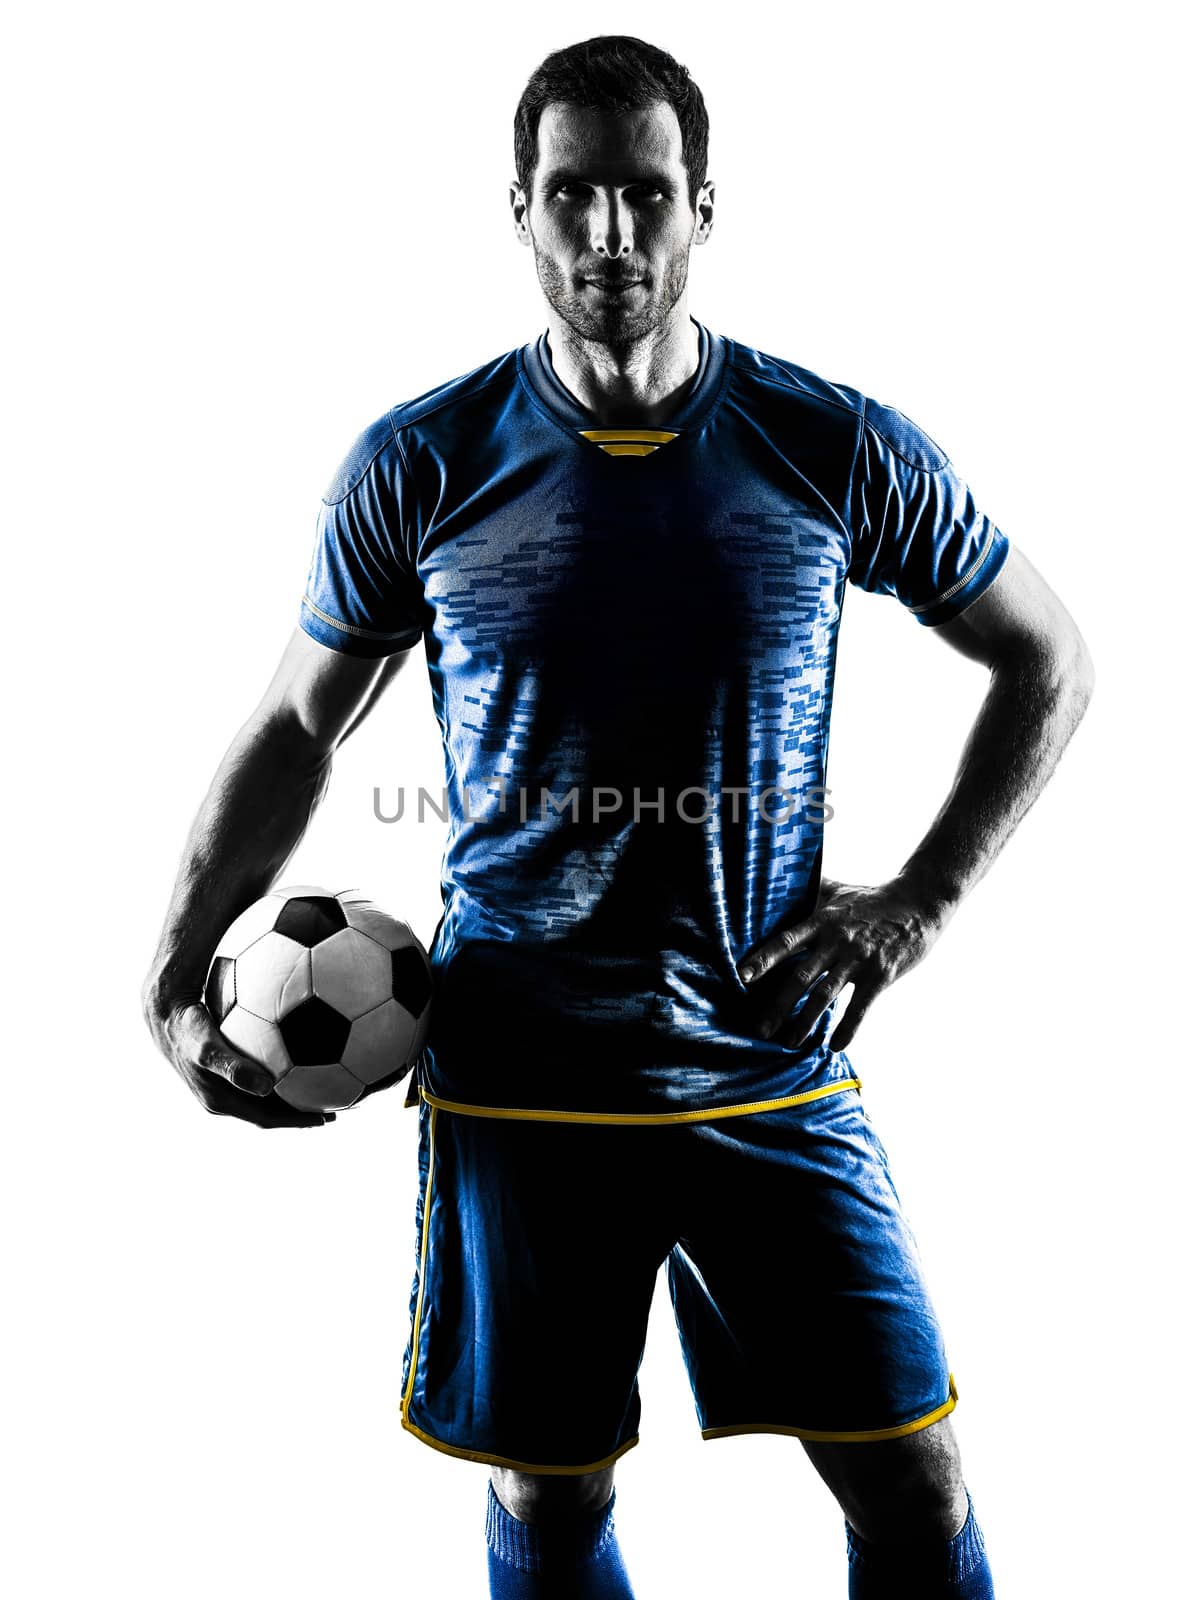 one caucasian soccer player man standing in silhouette isolated on white background